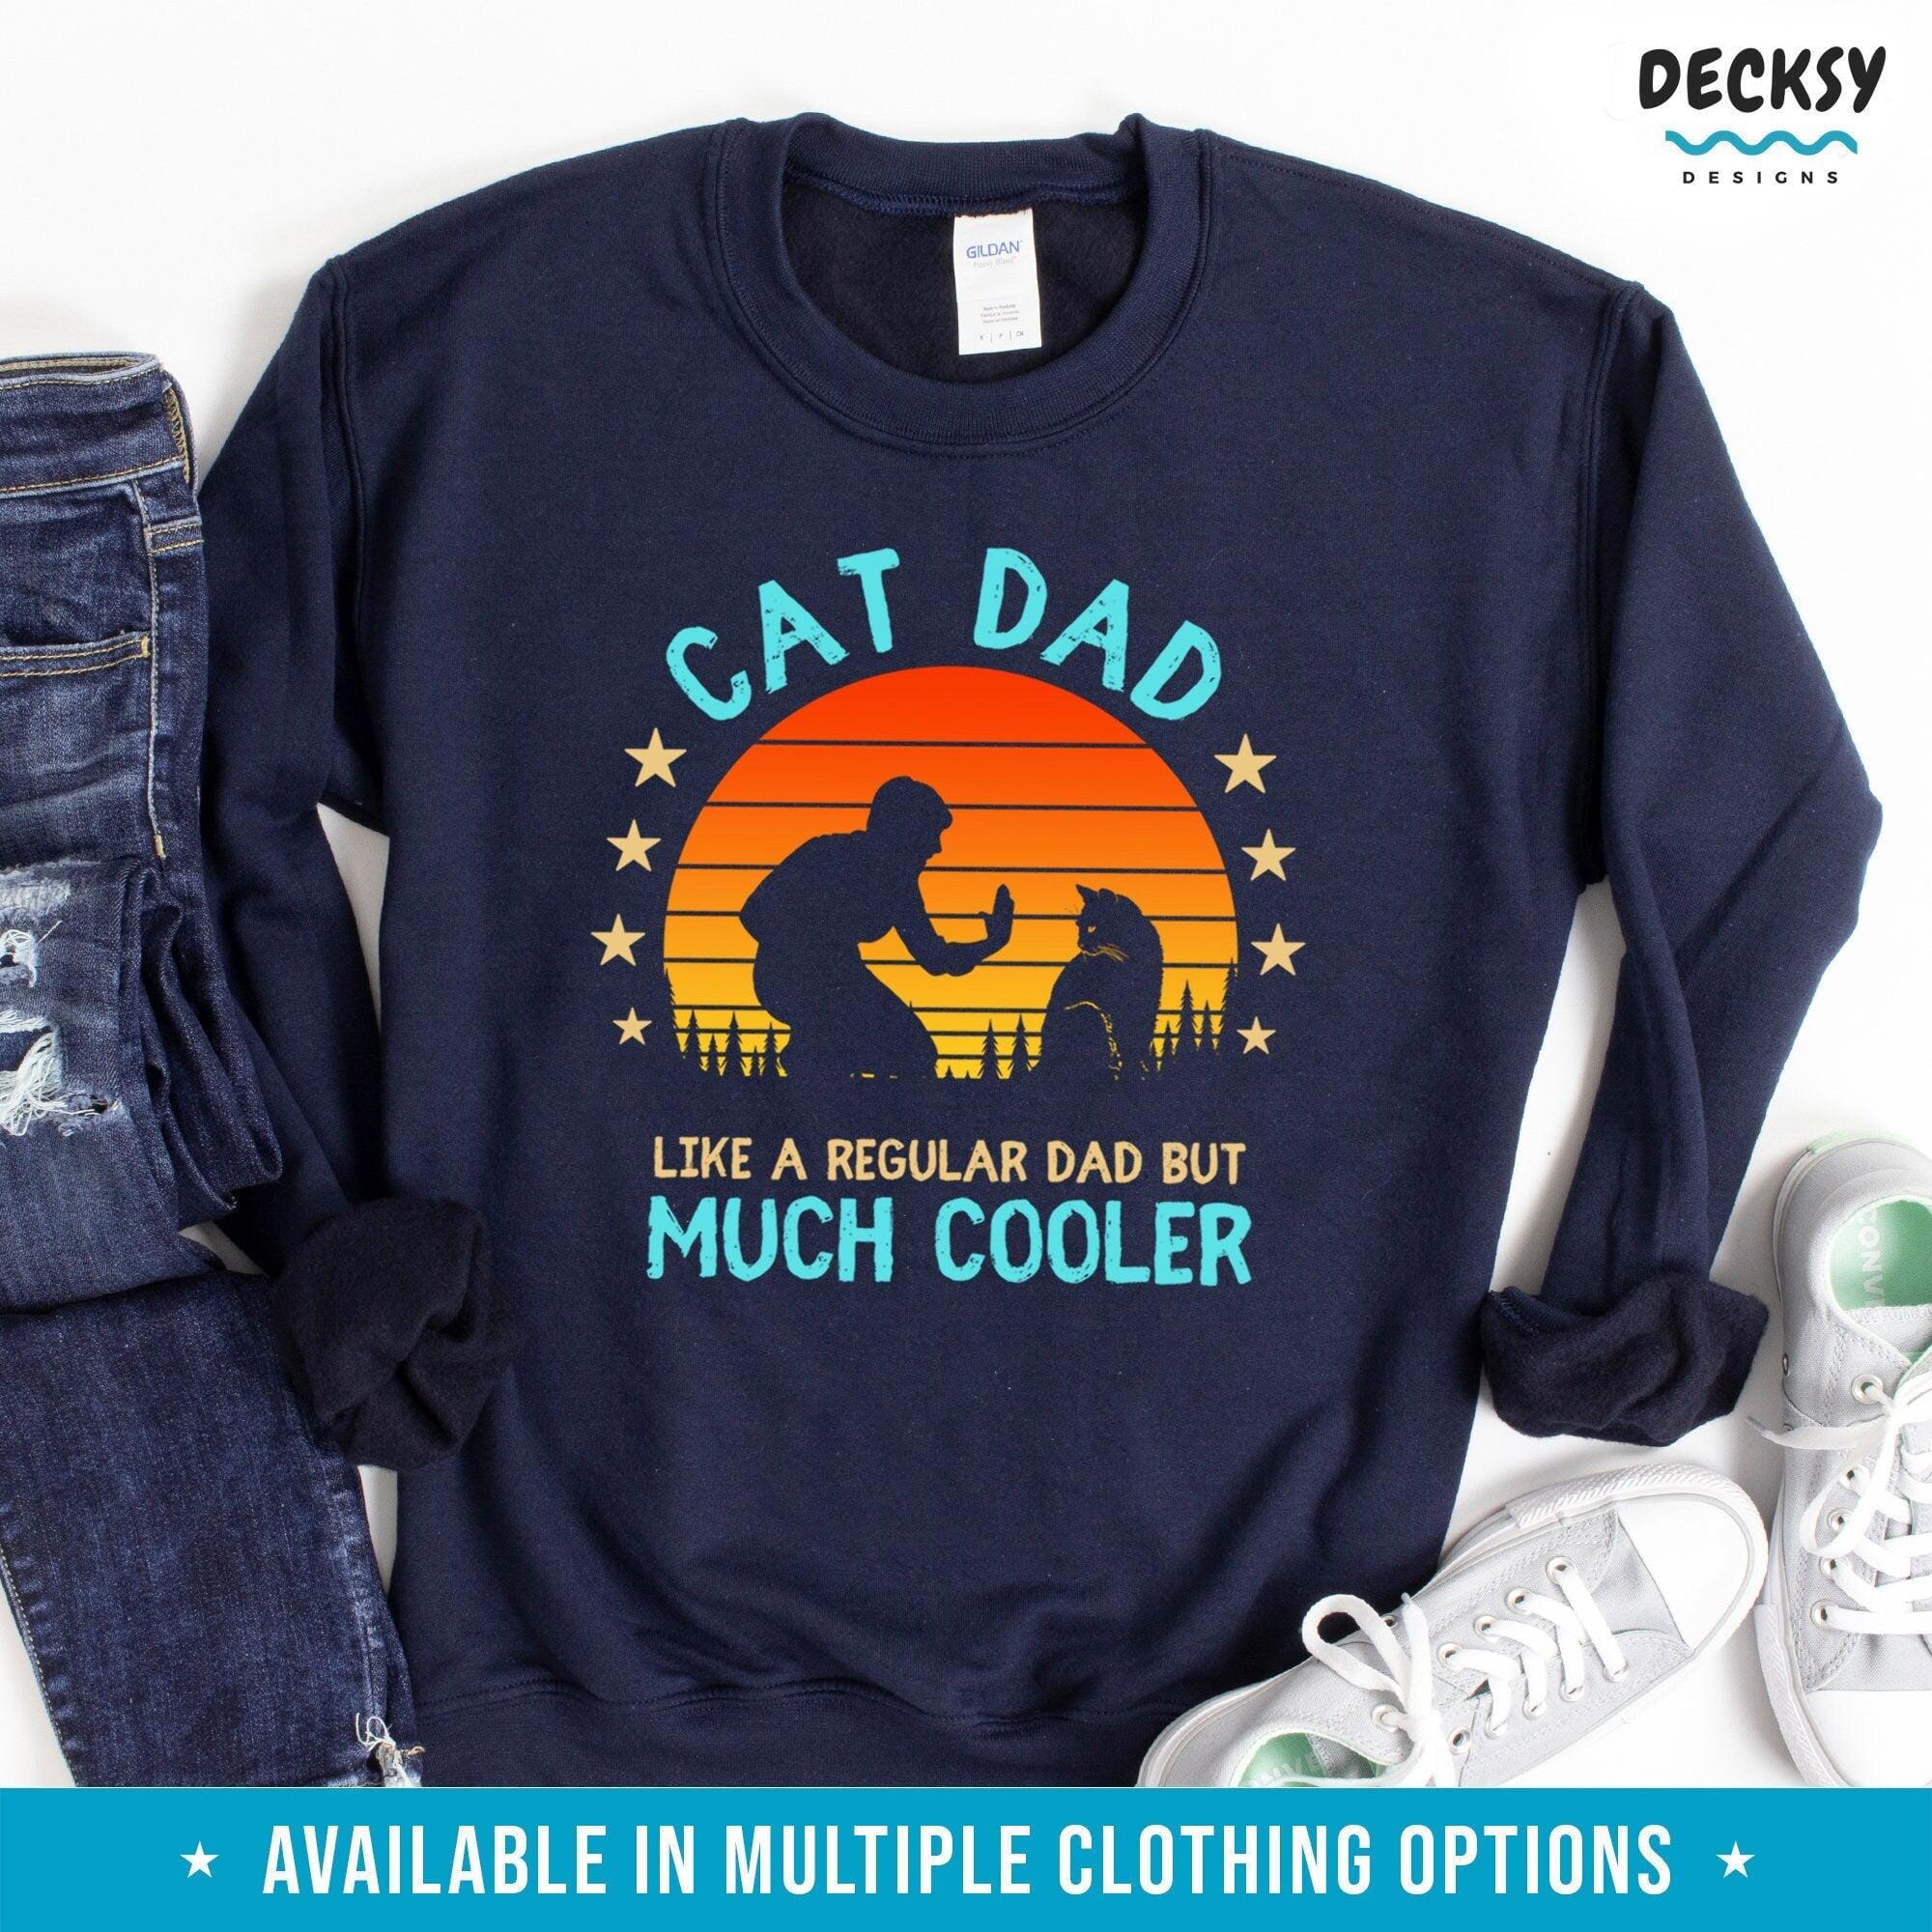 Cat Dad Shirt, Funny Men's Gift for Cat Owner-Clothing:Gender-Neutral Adult Clothing:Tops & Tees:T-shirts:Graphic Tees-DecksyDesigns